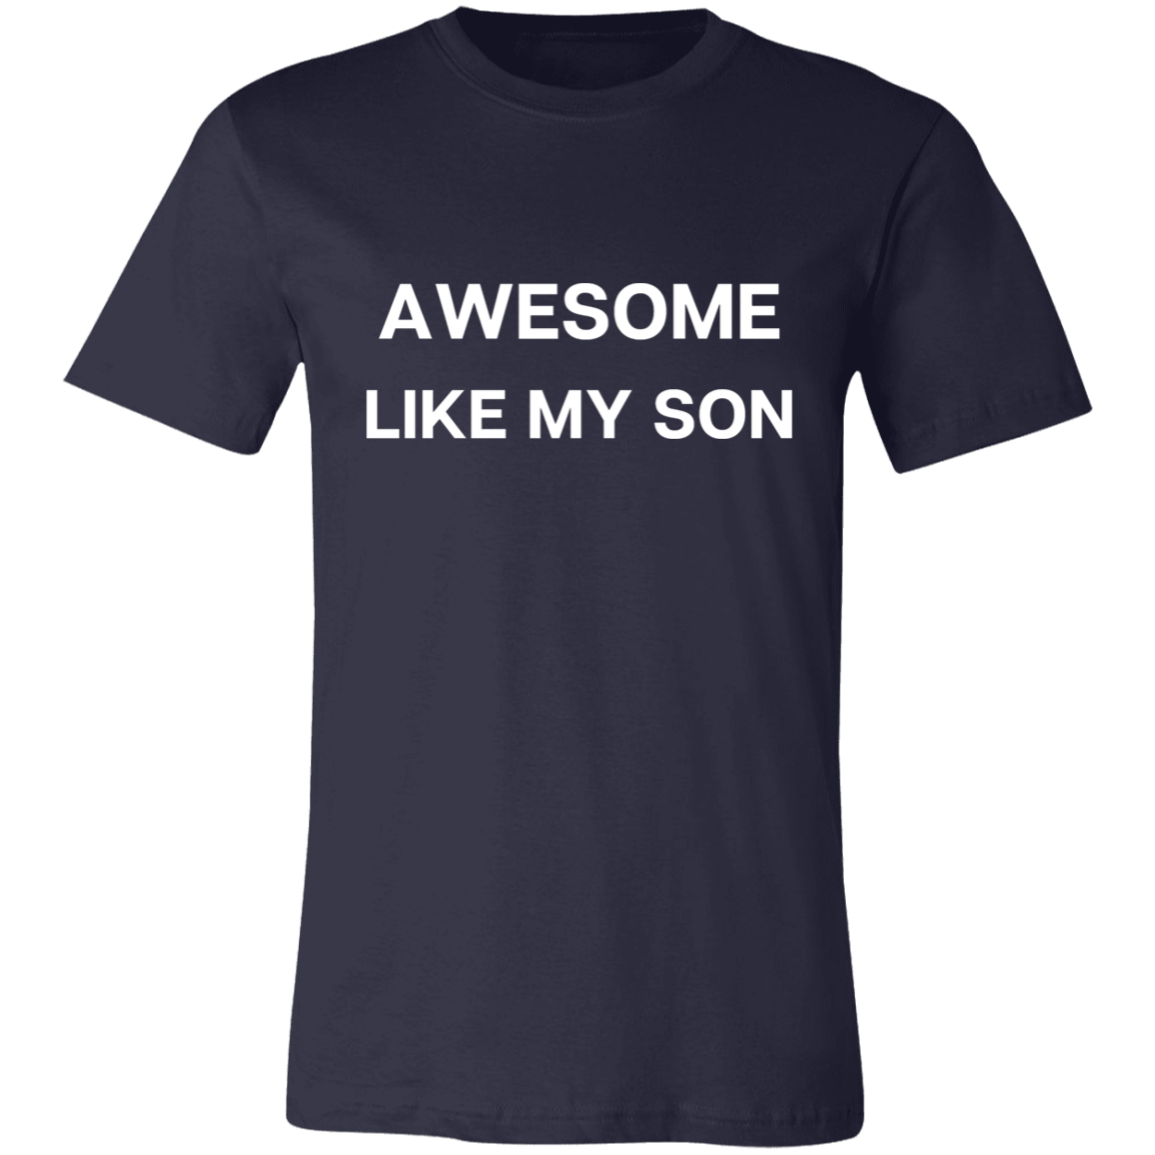 Awesome Like My Son Short-Sleeve T-Shirt